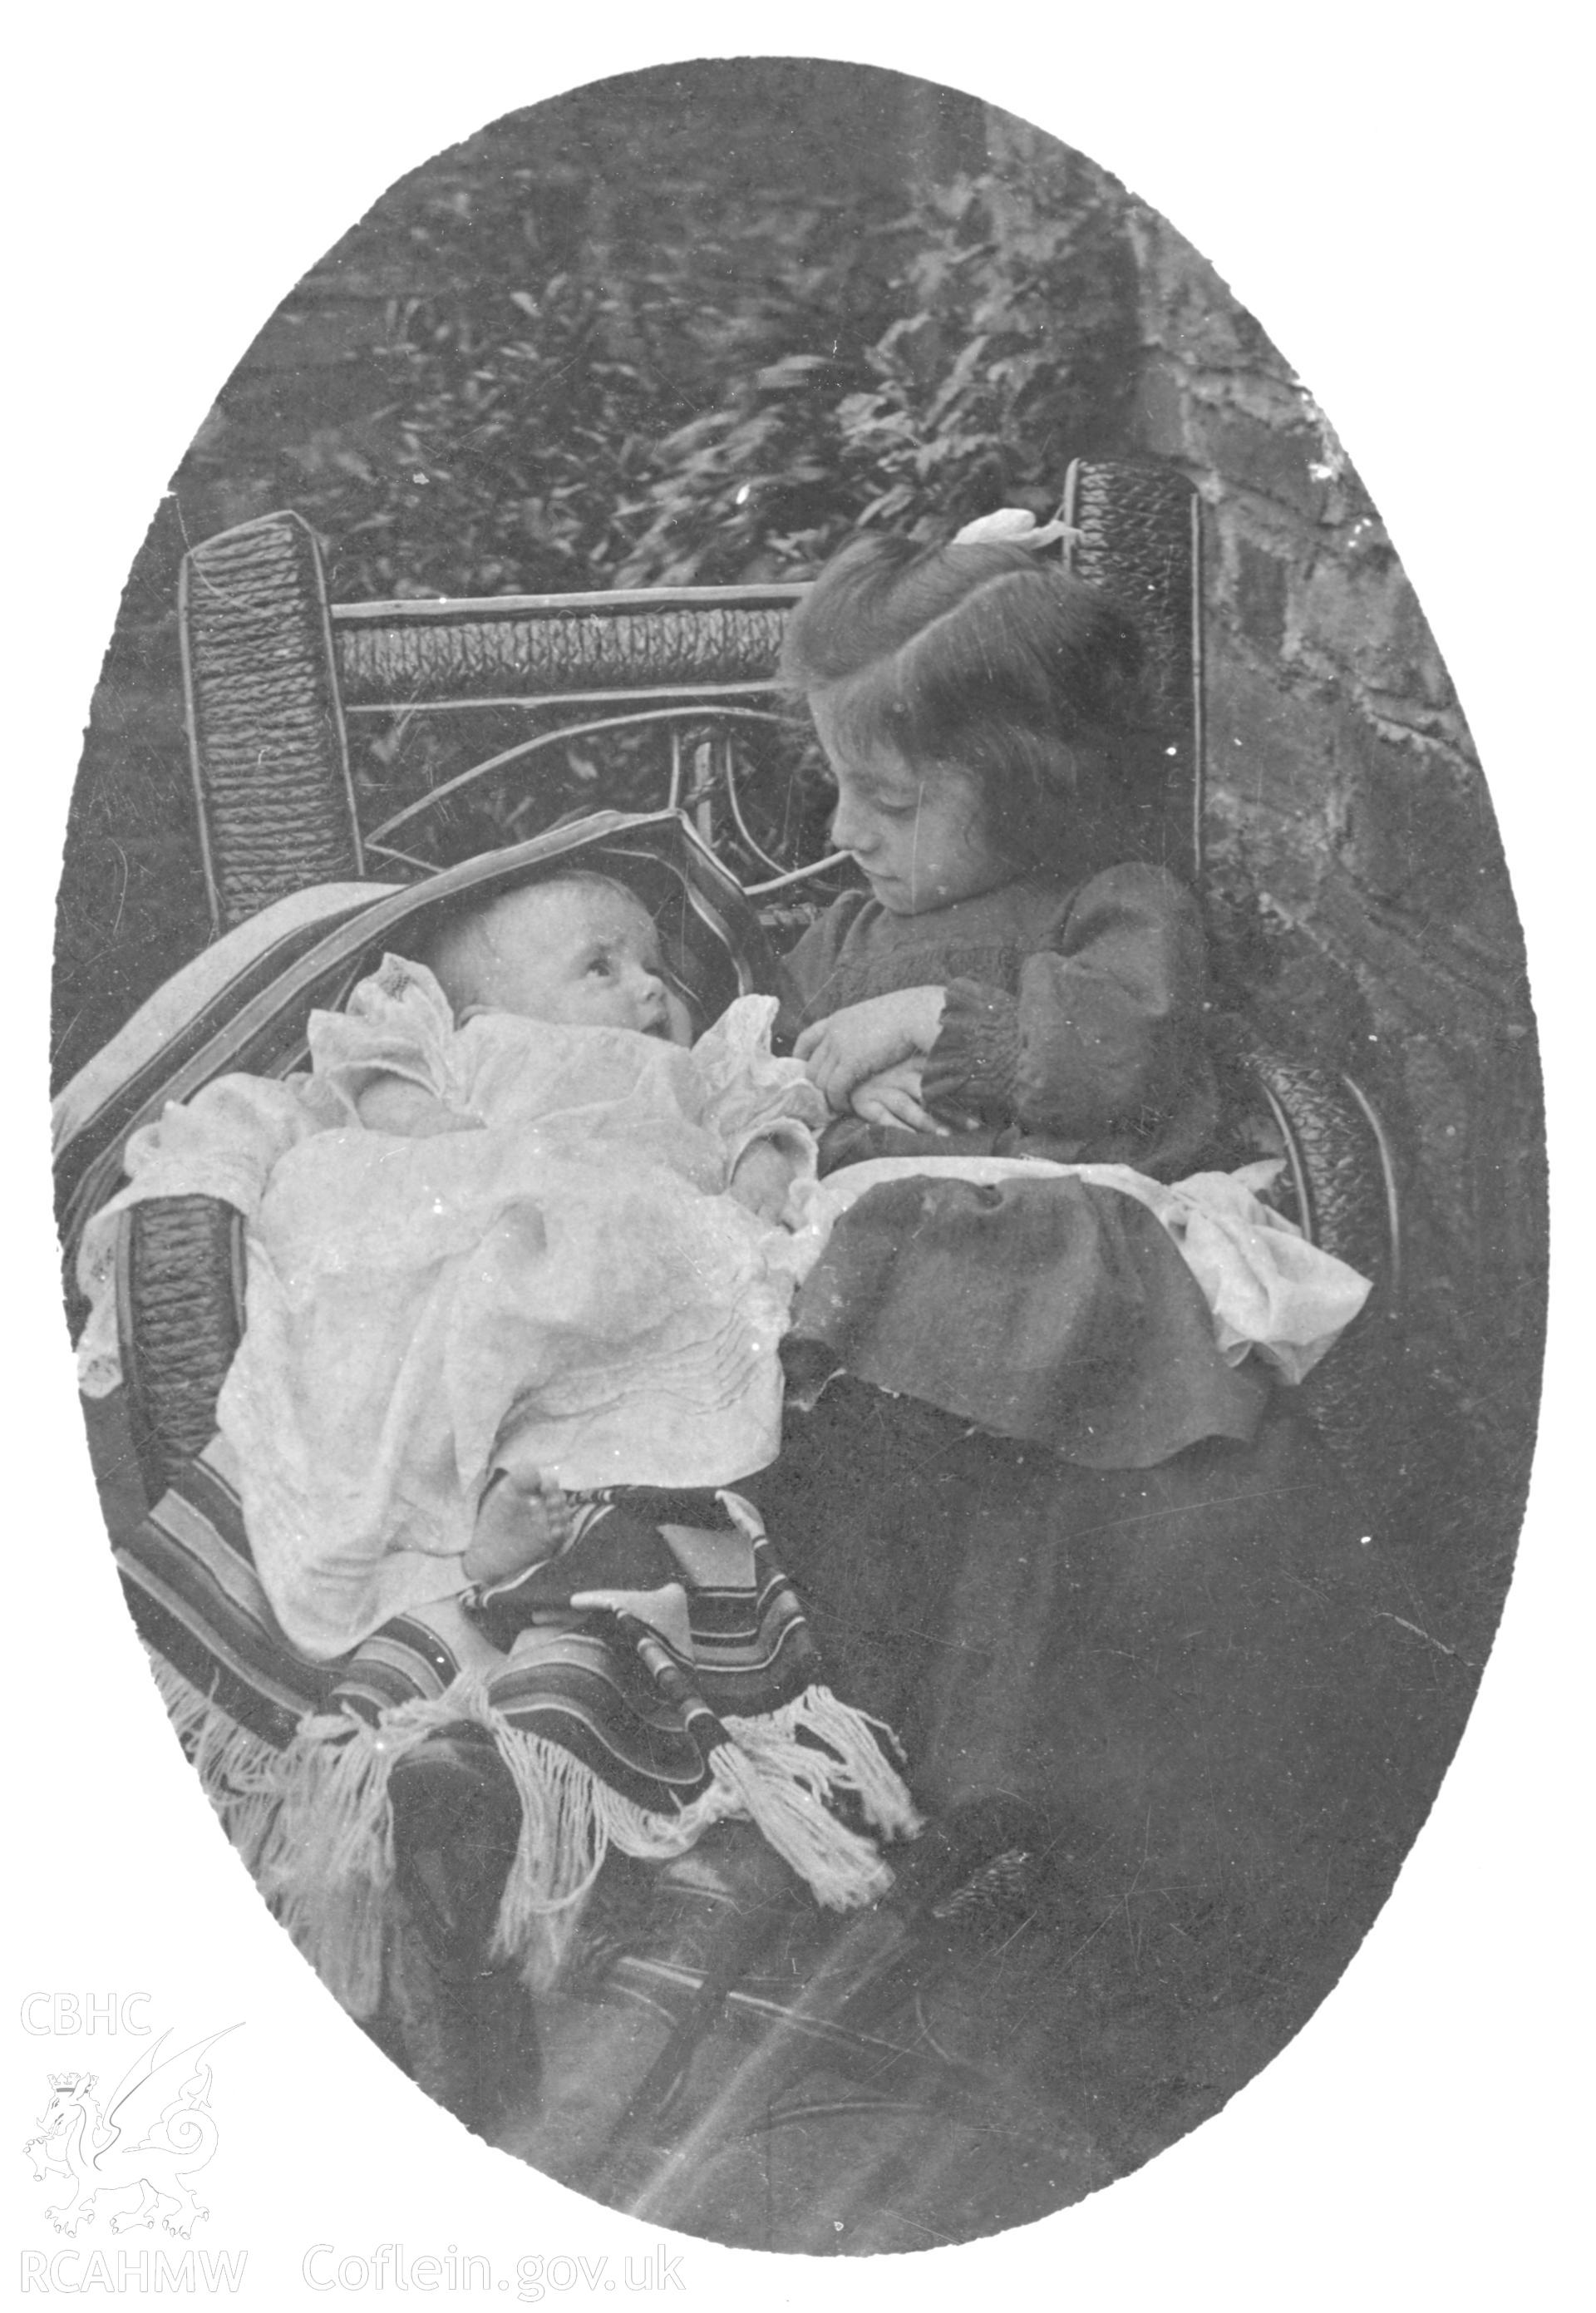 "At Llanelly 1905". Photo of a seated child and baby. Digitised from a photograph album showing views of Aberystwyth and District, produced by David John Saer, school teacher of Aberystwyth. Loaned for copying by Dr Alan Chamberlain.